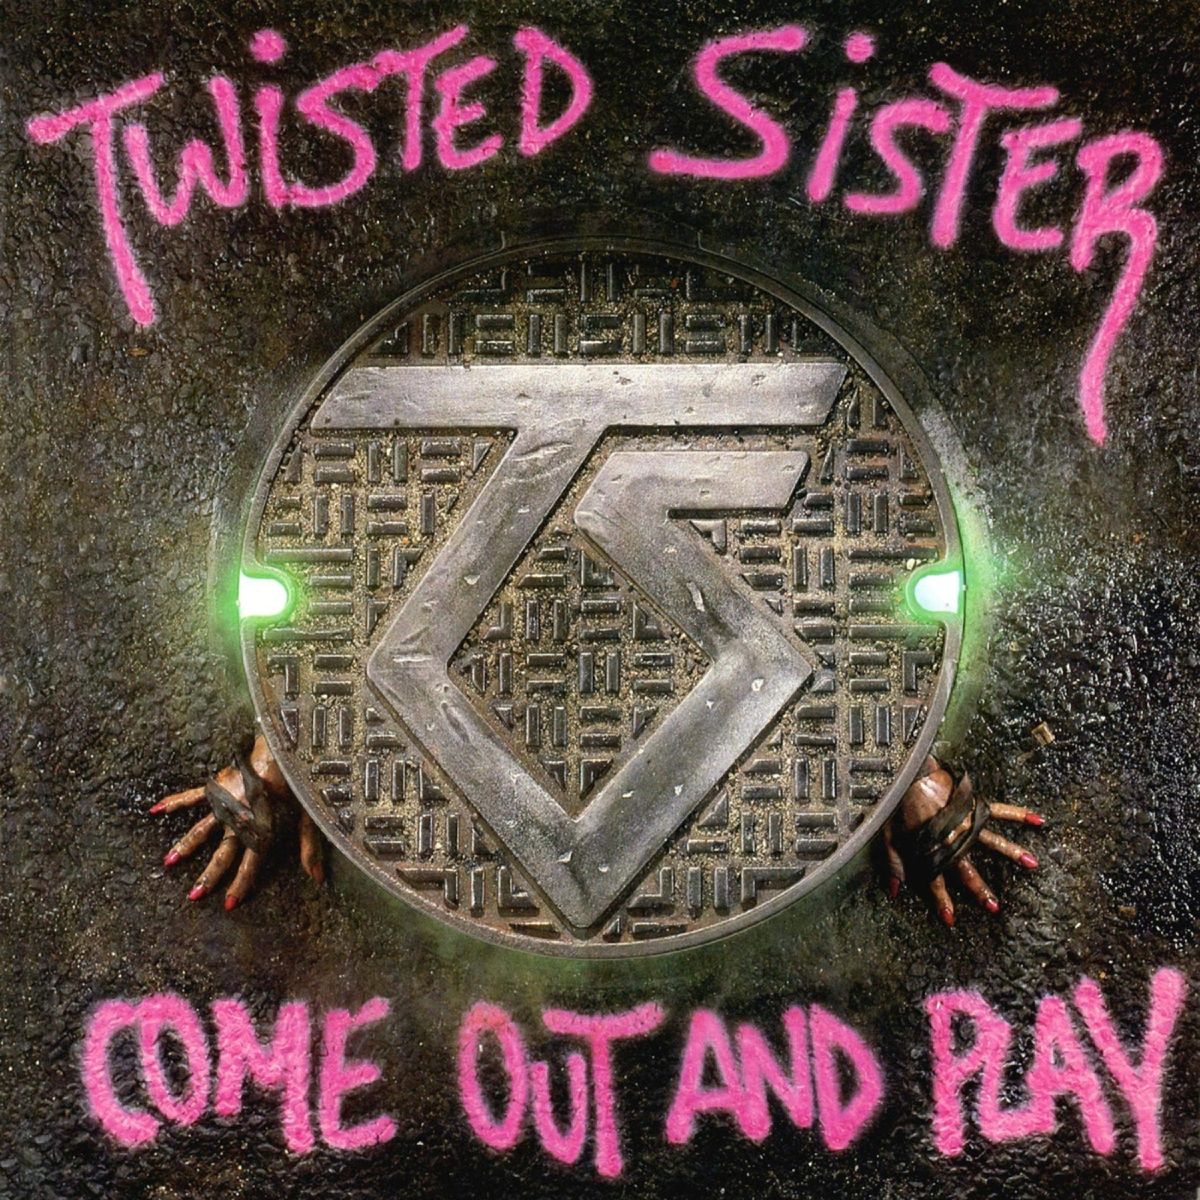 Cover of the album "Come Out and Play" by Twisted Sister